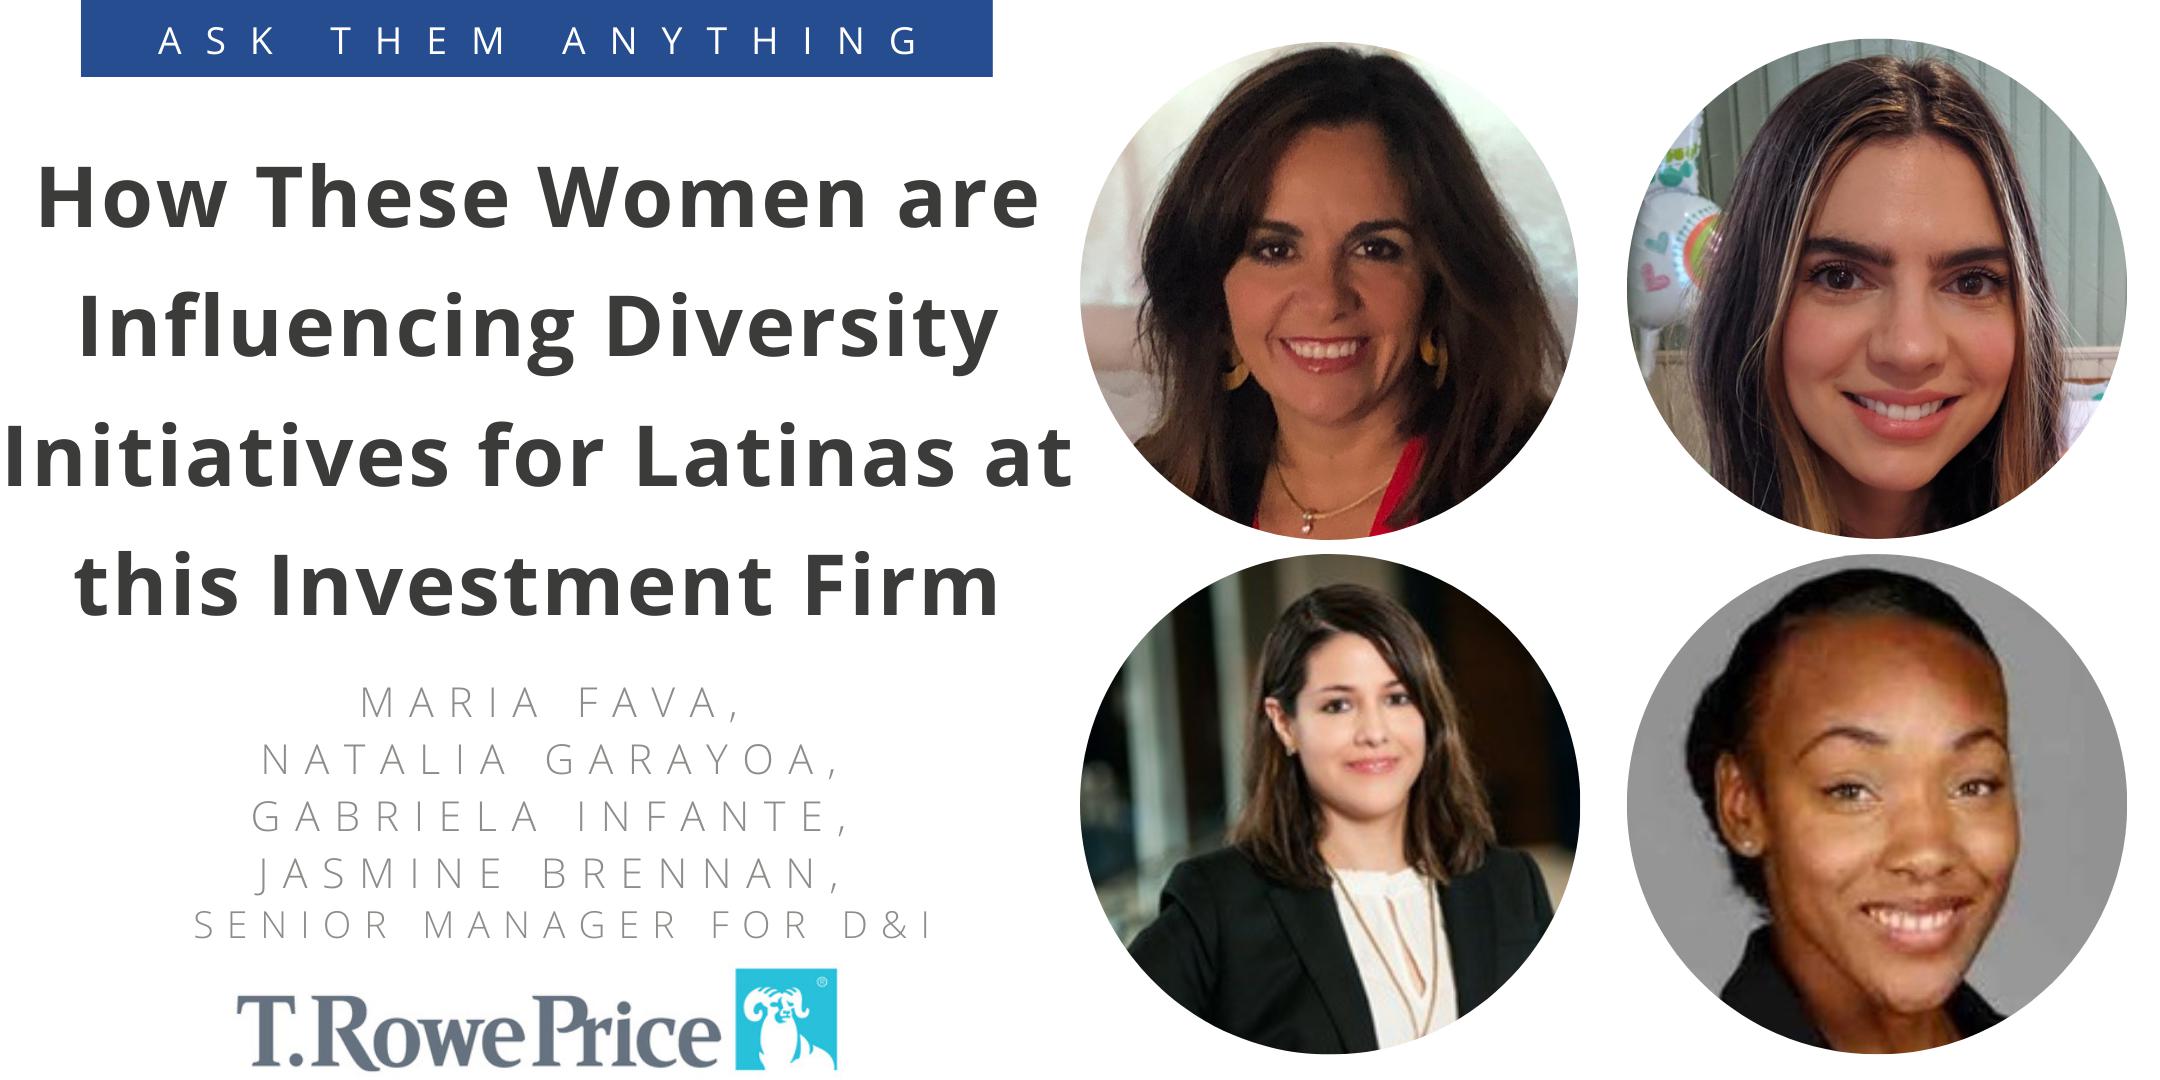 How These Women are Influencing Diversity Initiatives for Latinas at this Investment Firm